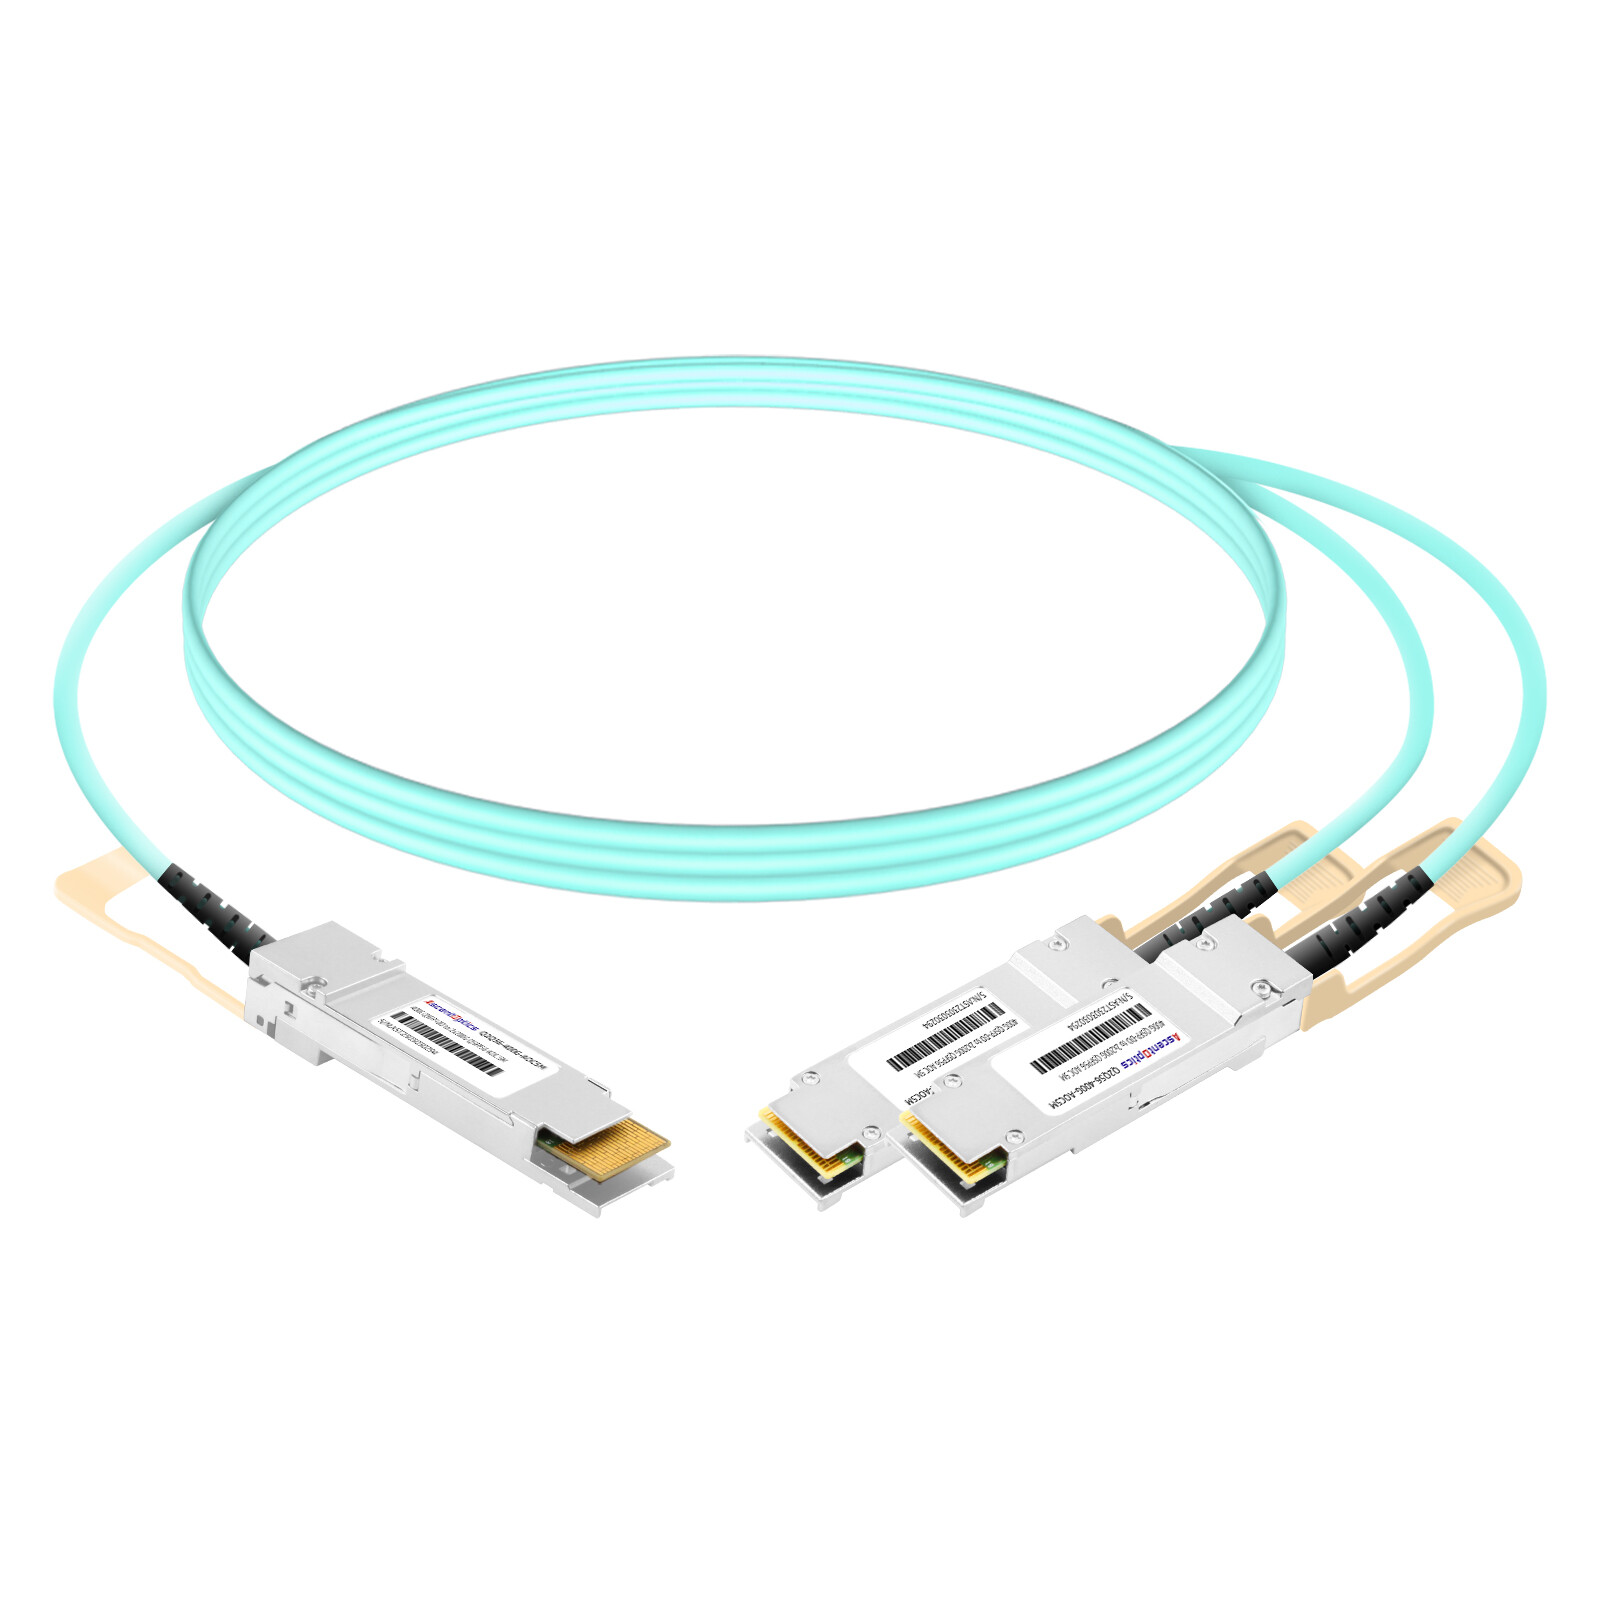 400G QSFP-DD to 2x 200G QSFP56 Breakout AOC Cable,5 Meters